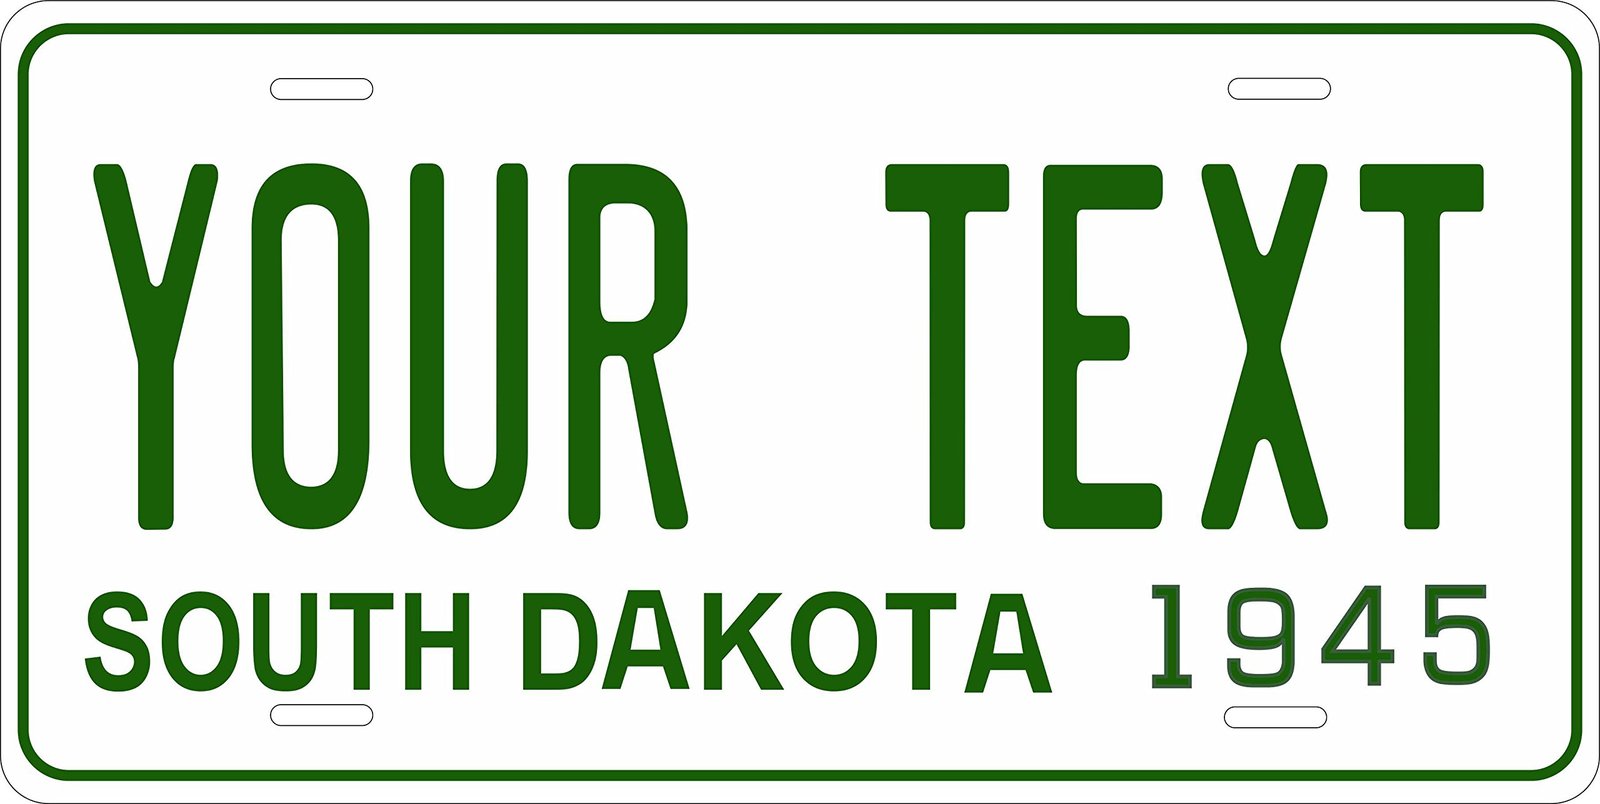 South Dakota 1945 Personalized Cutoms Novelty Tag Vehicle Car Auto License Plate - $16.75